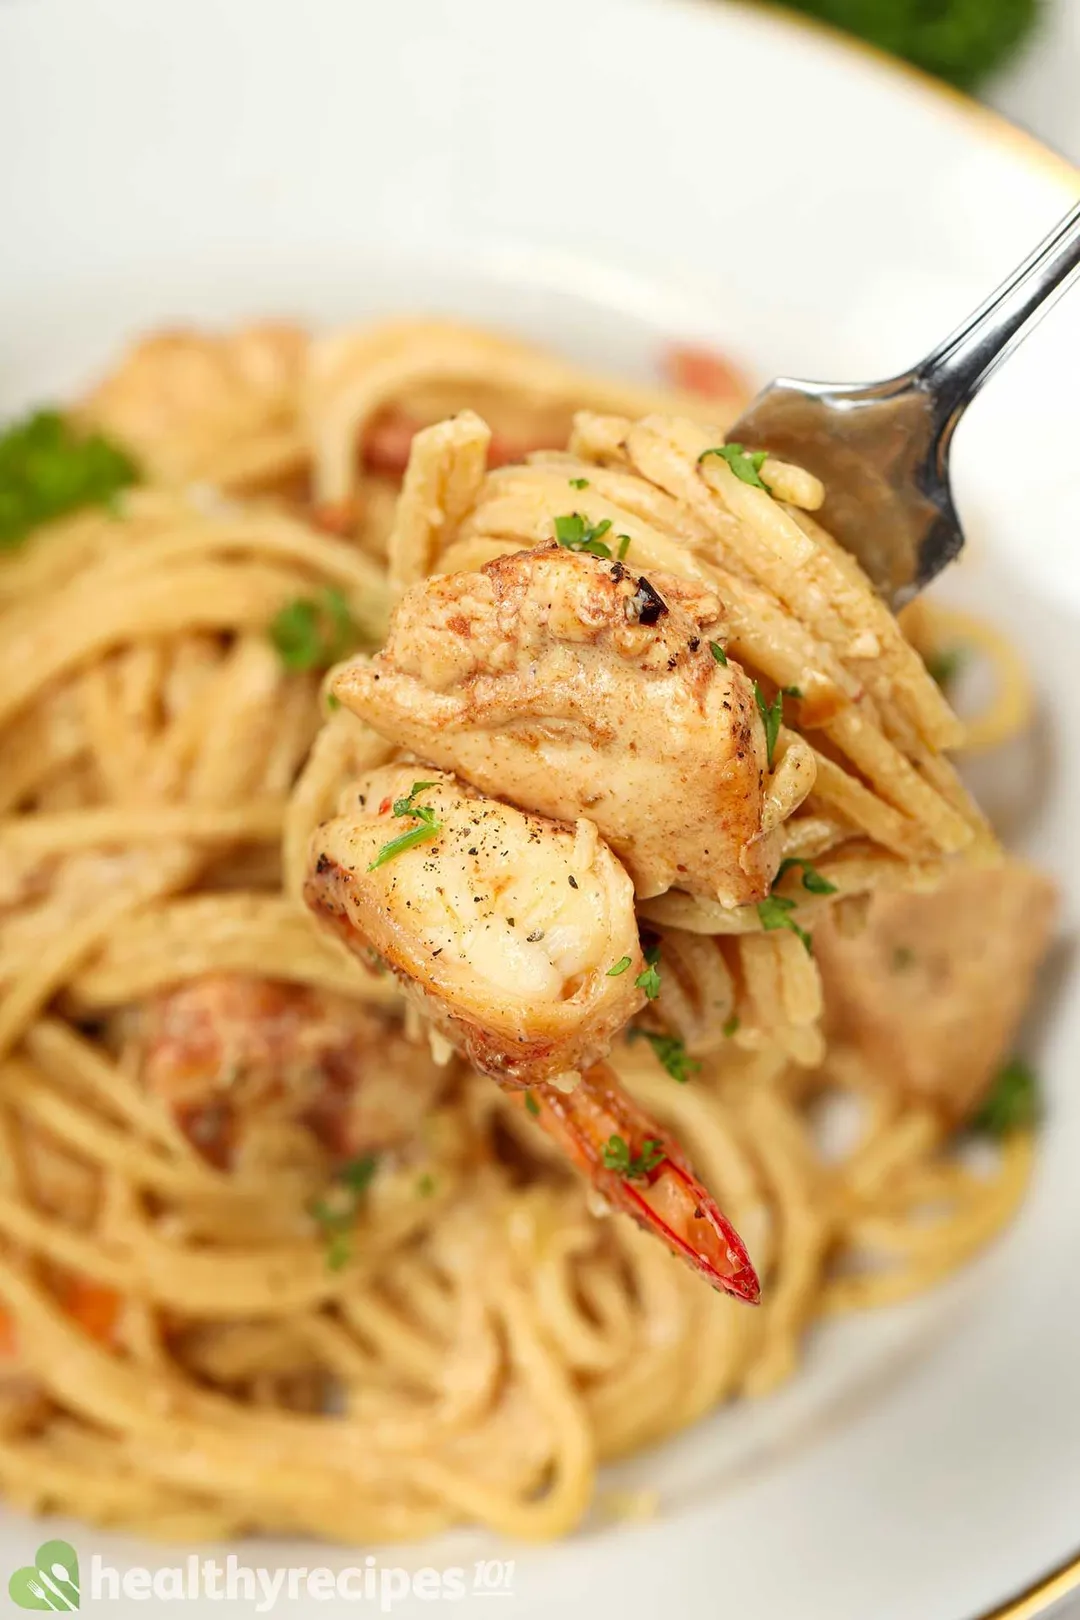 A close-up picture of a fork holding some cheesy pasta, a cooked shrimp, and a chicken breast chunk